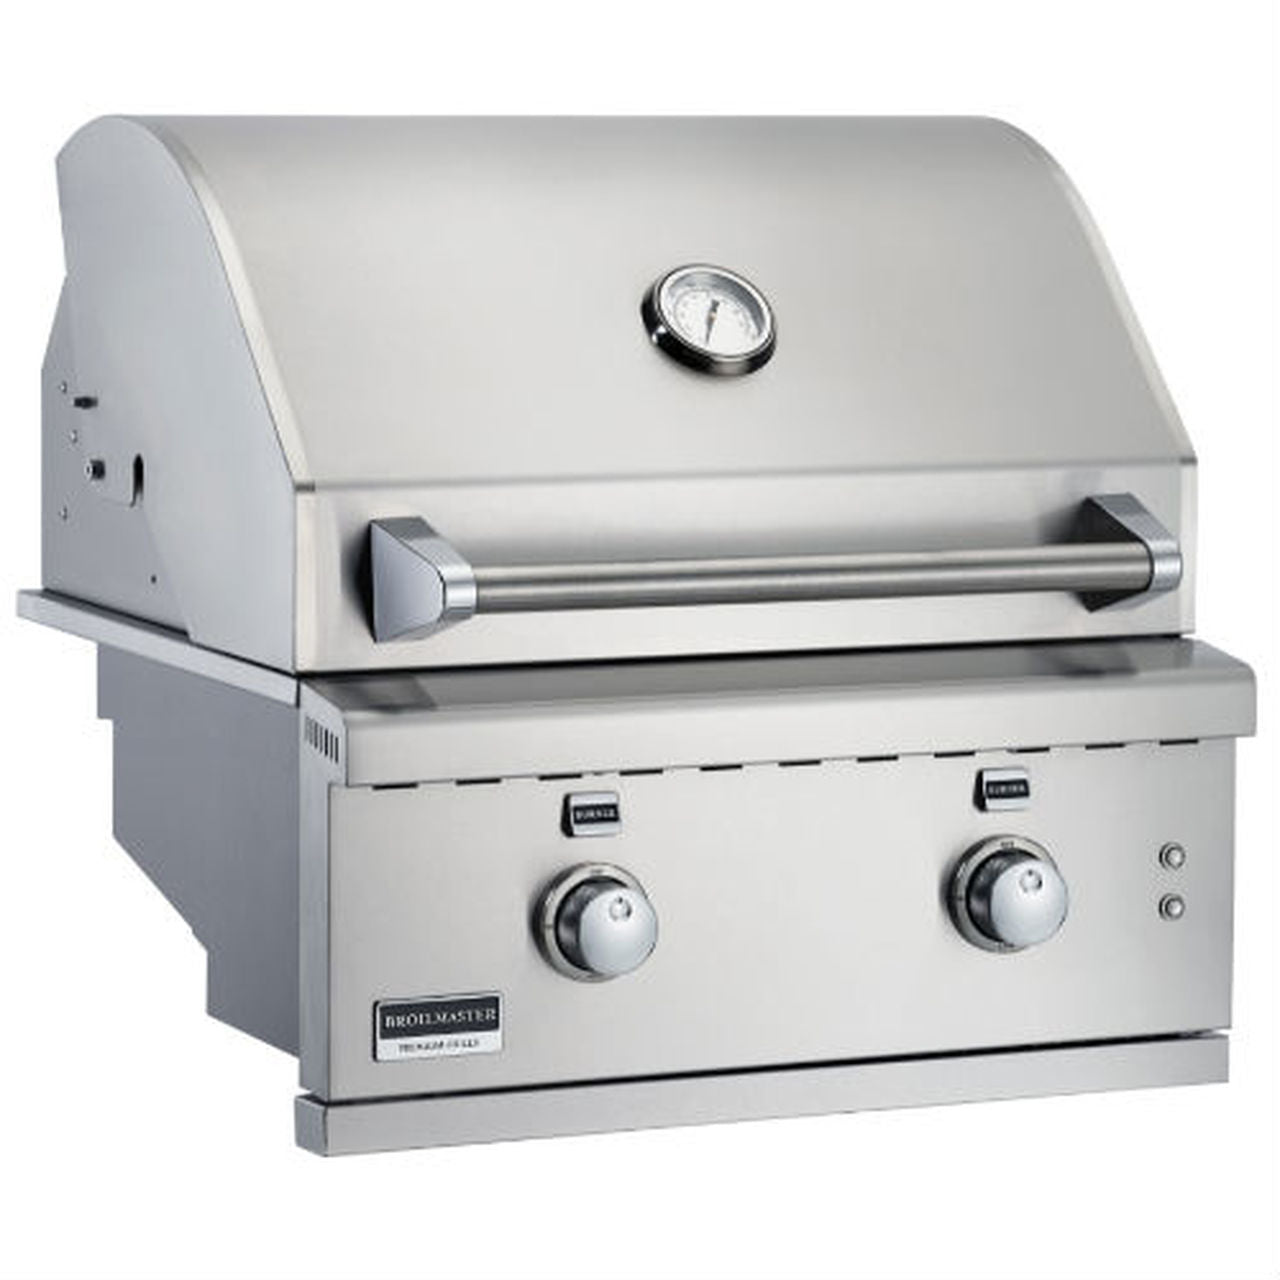 Broilmaster 26-Inch Stainless Steel Cart Gas Grill - BSG262